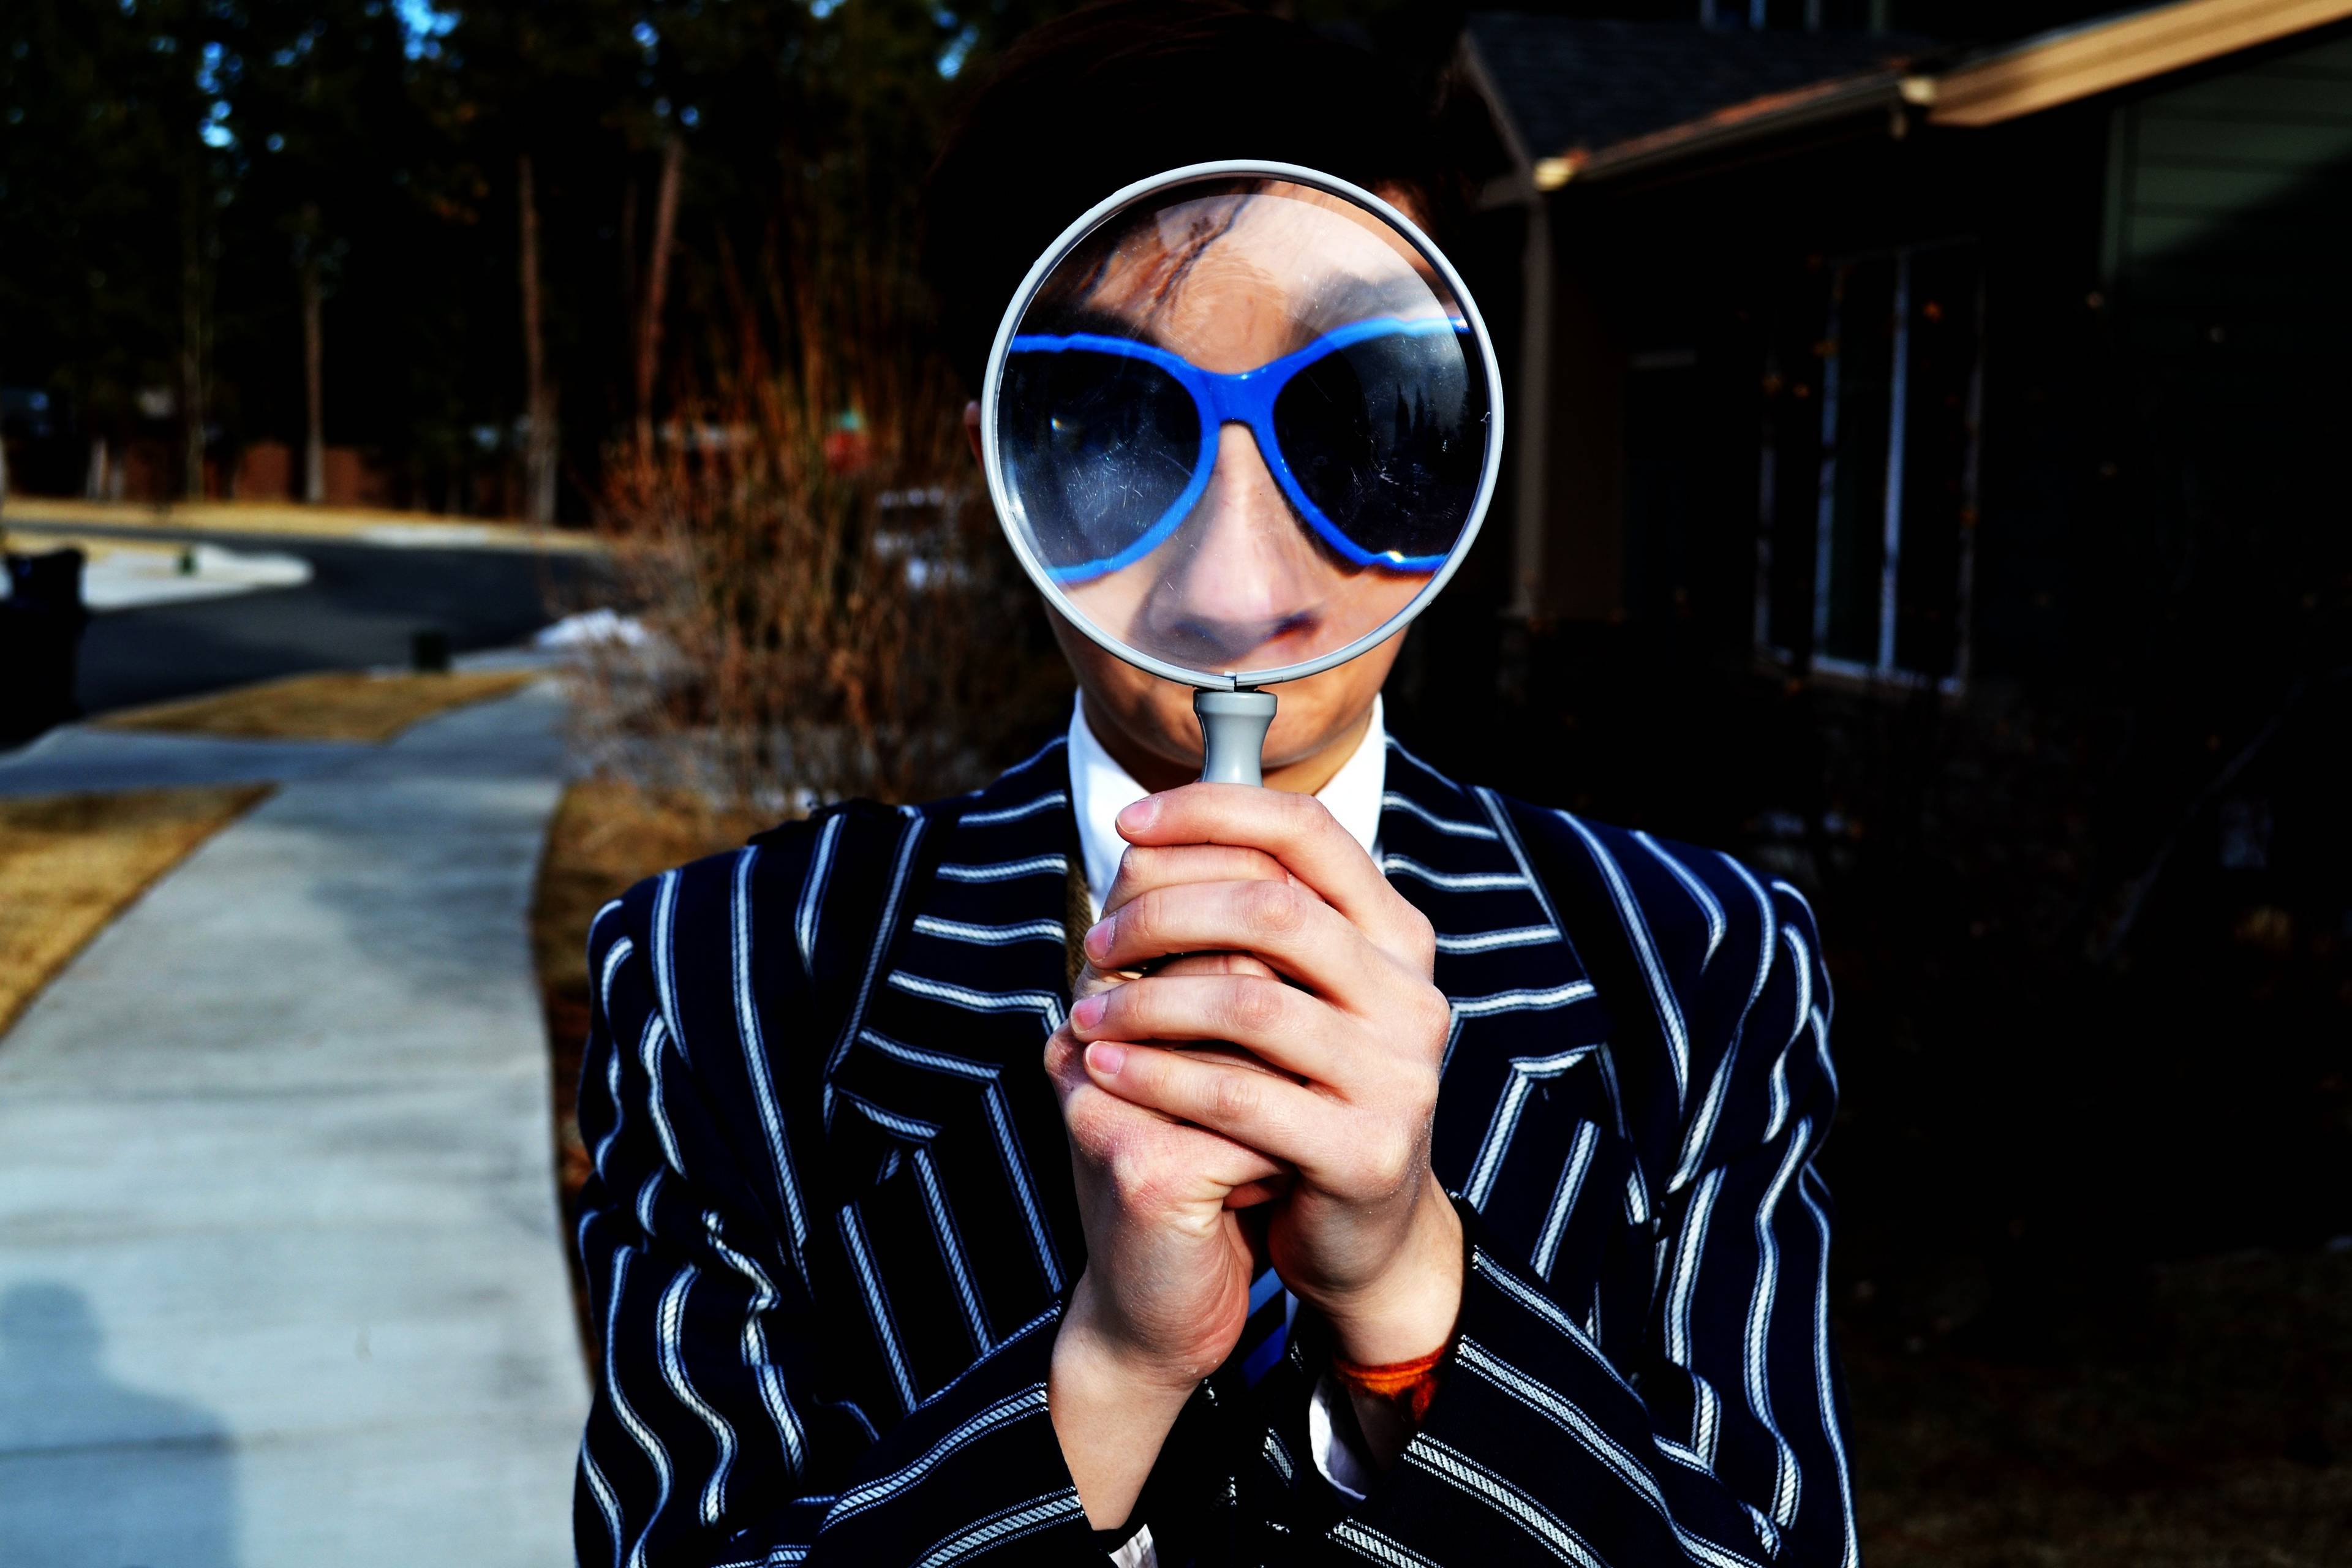 young person in a suit looking through a magnifying glass